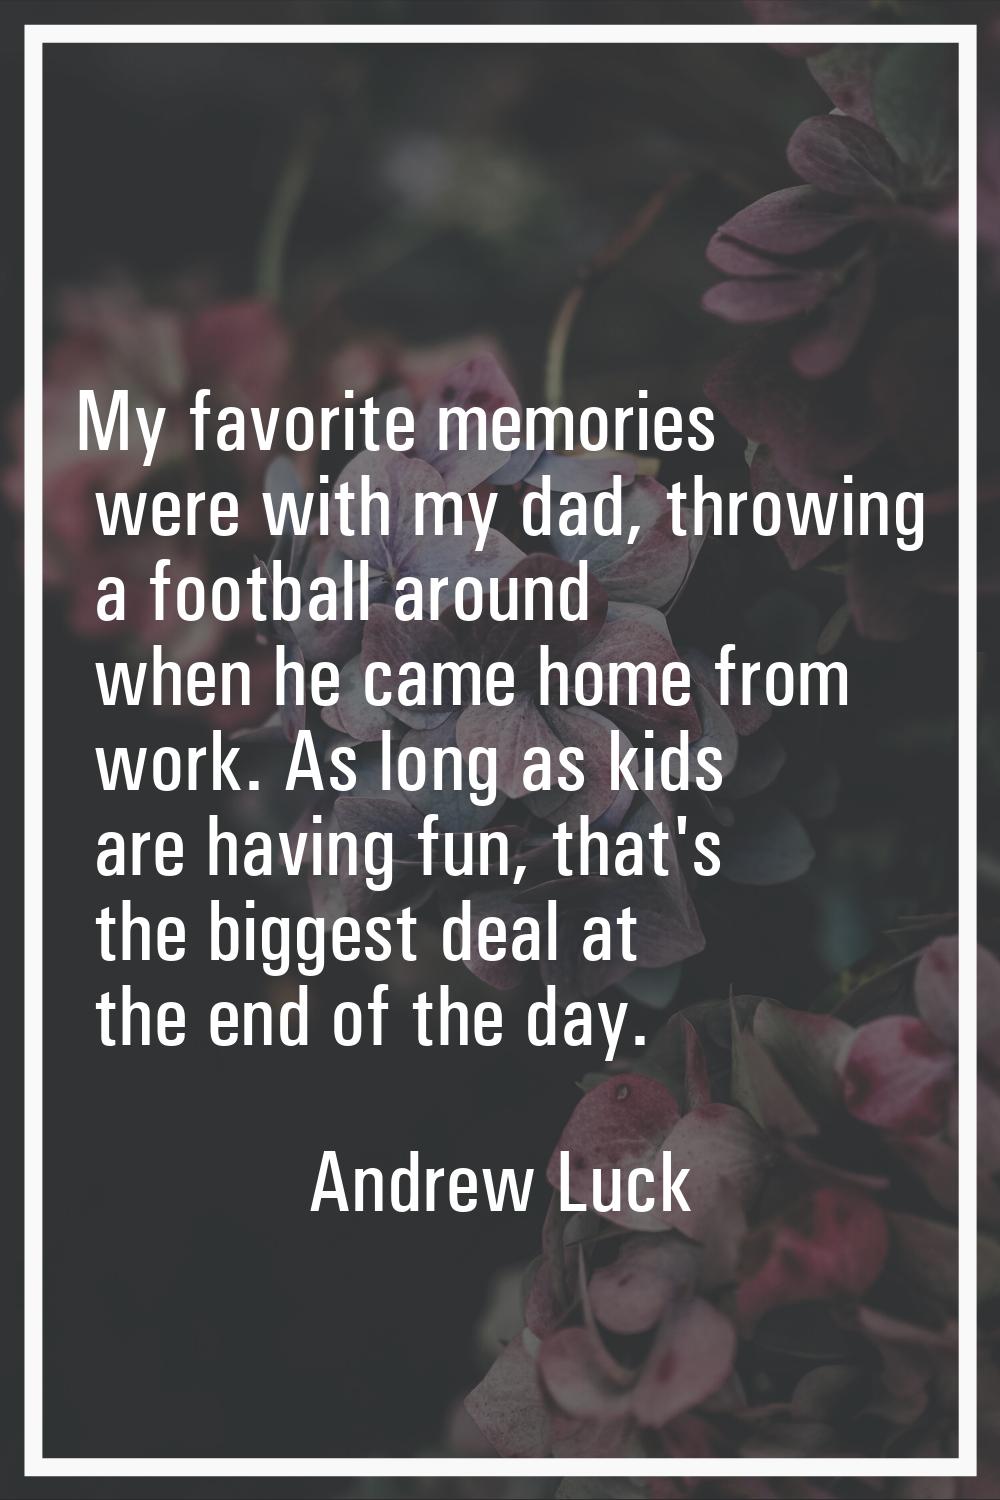 My favorite memories were with my dad, throwing a football around when he came home from work. As l